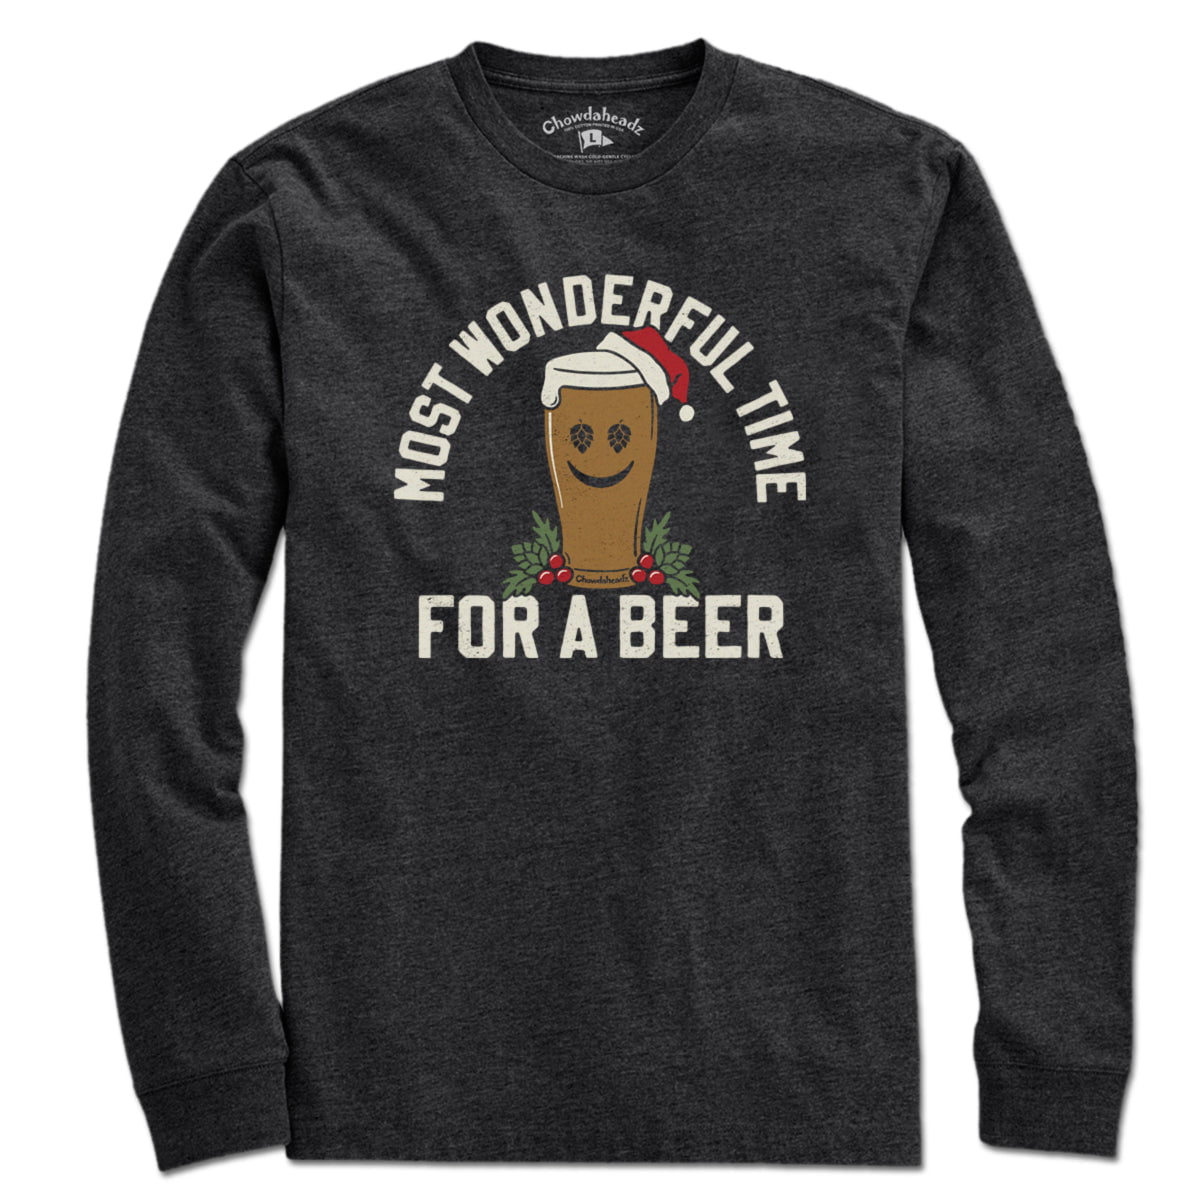 Most Wonderful Time For A Beer T-shirt - Chowdaheadz